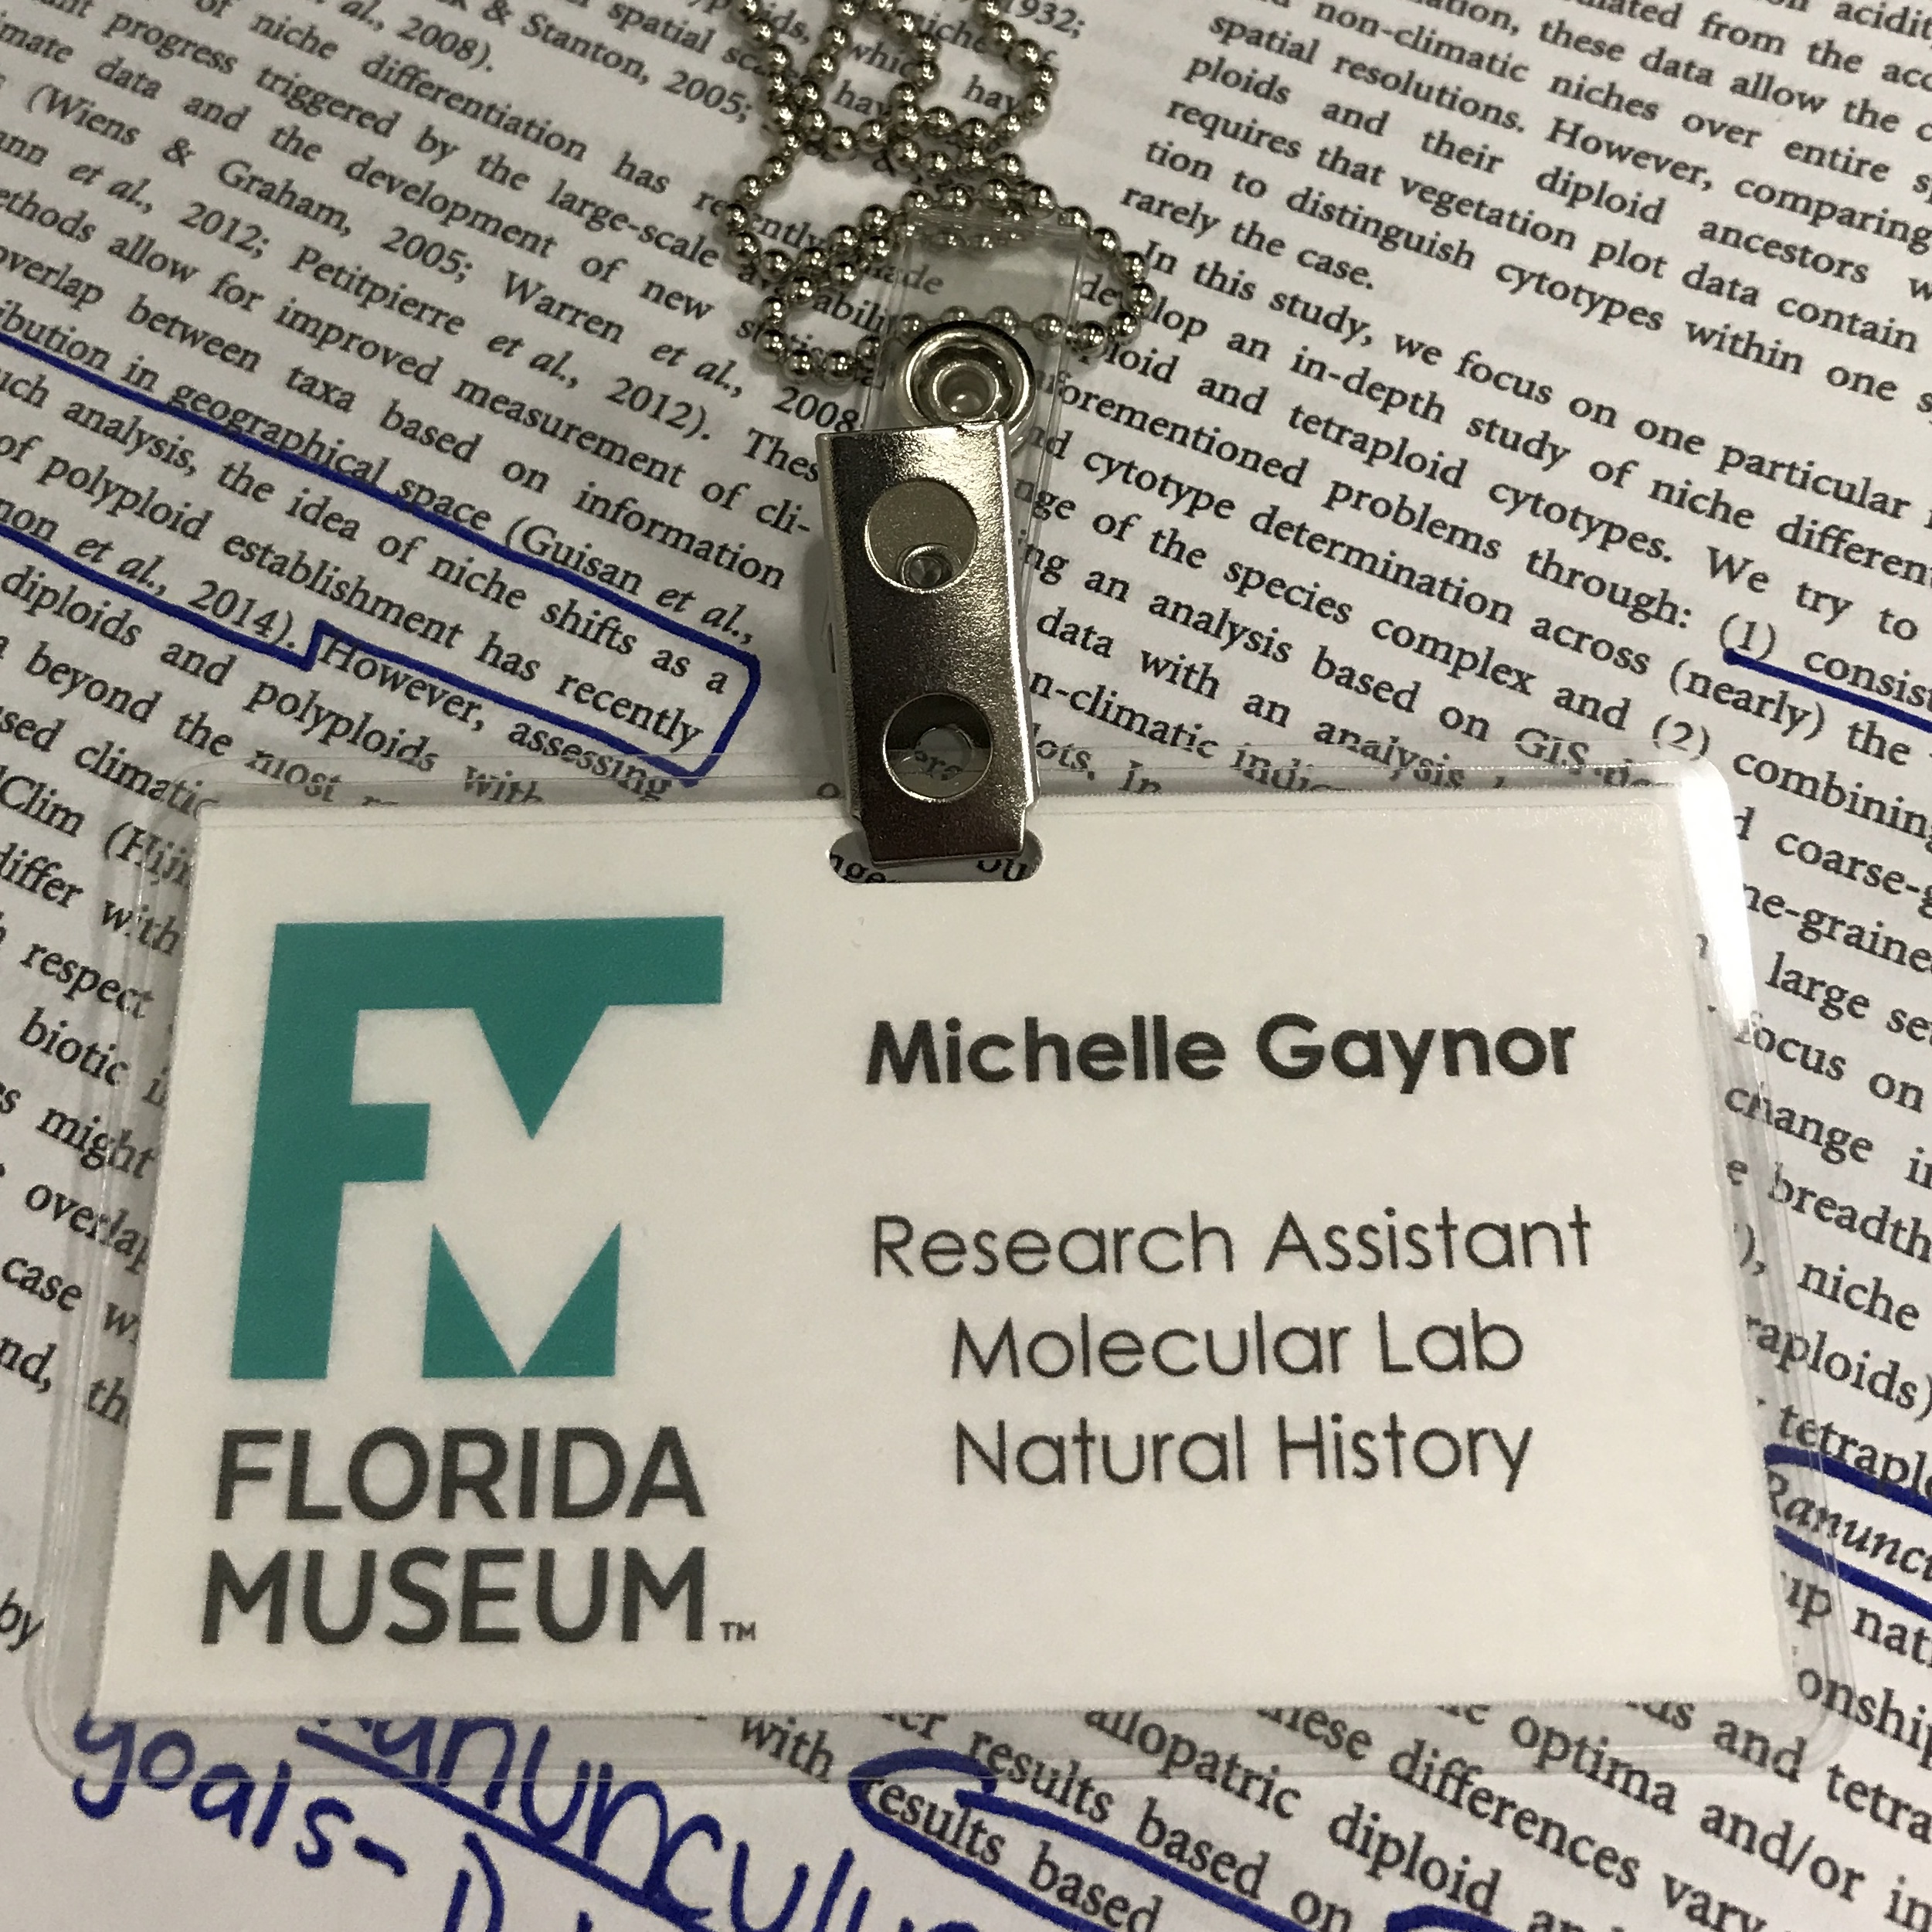 Nametag from the Florida Museum for Michelle Gaynor, Research Assistant, Molecular Lab Natural History.